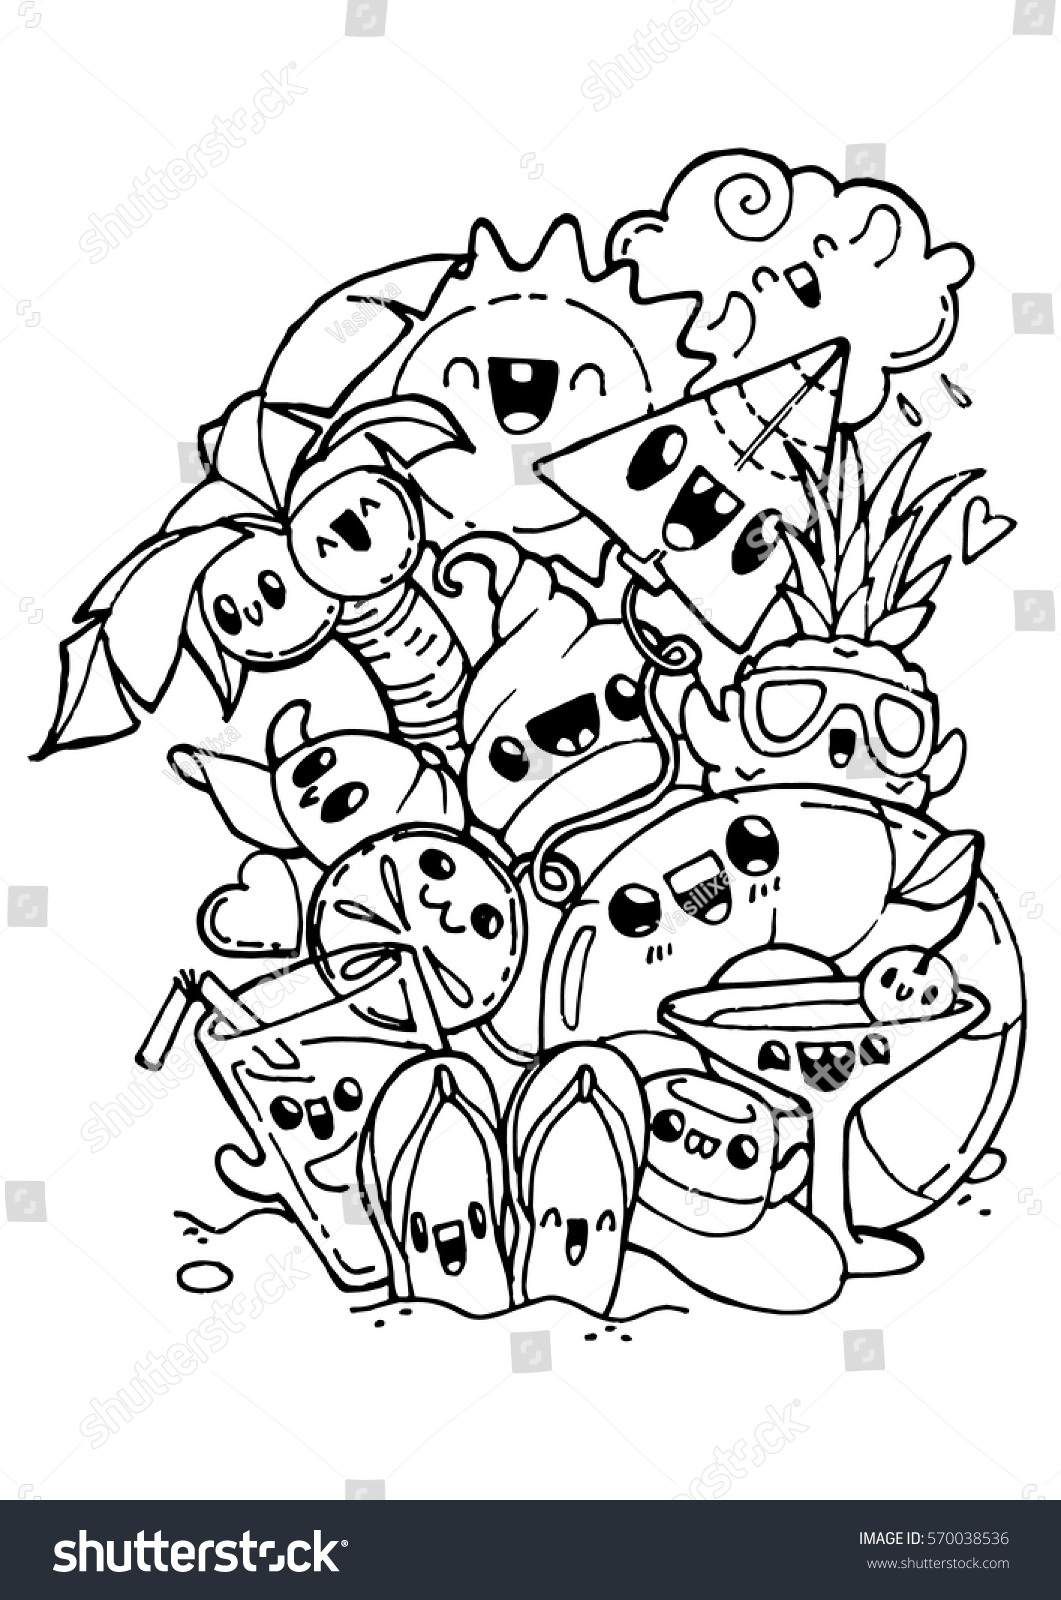 Coloring pages for kids for adult anti stress coloring book black